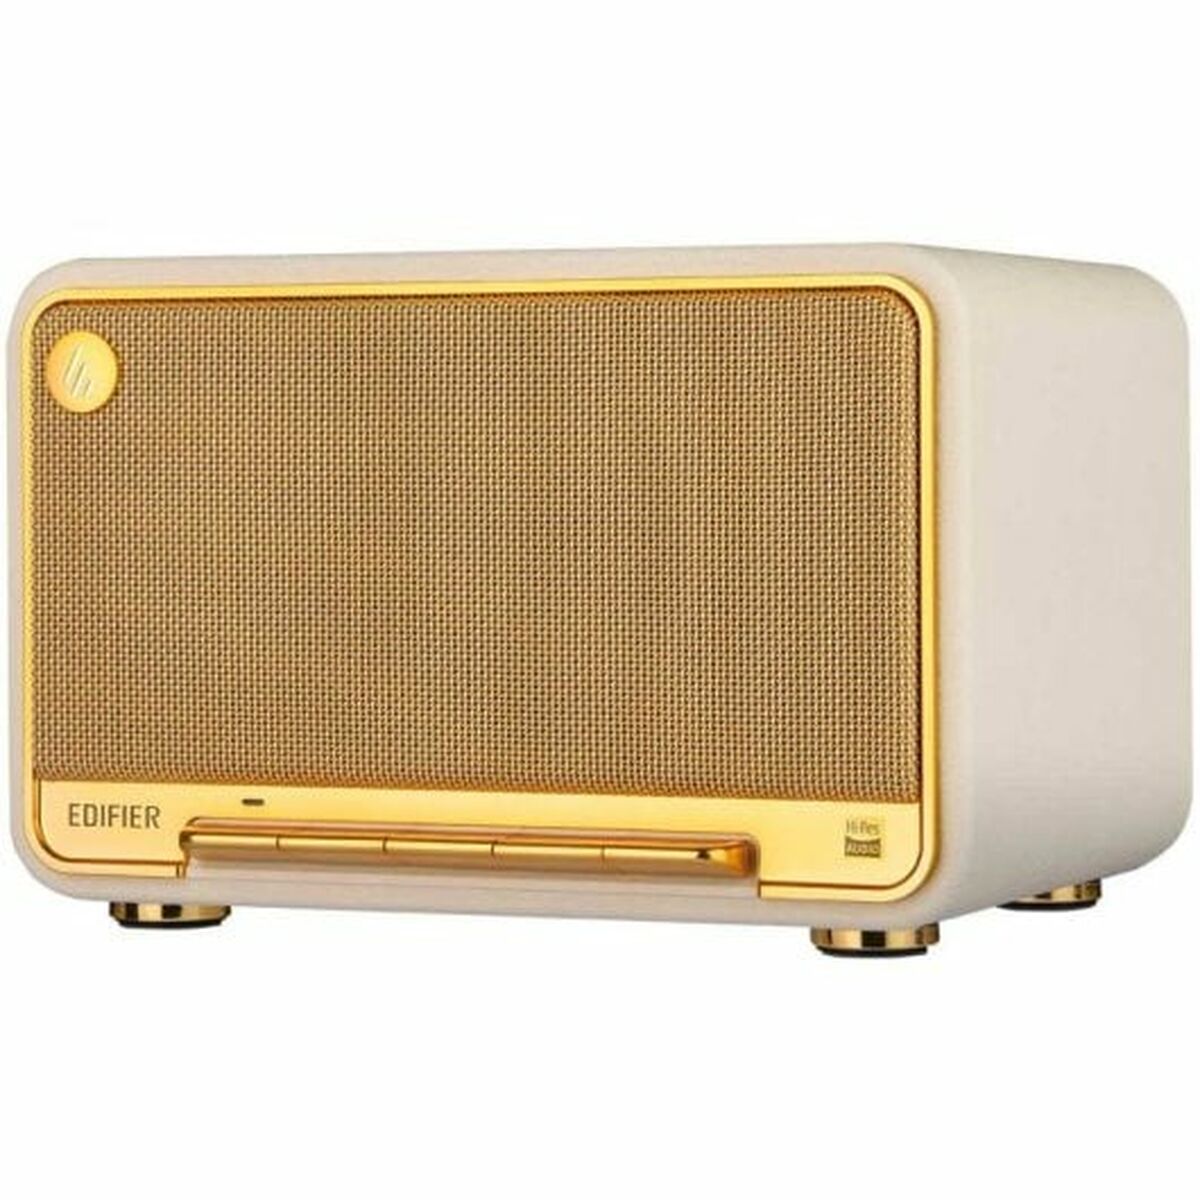 Portable Bluetooth Speakers Edifier White, Edifier, Electronics, Mobile communication and accessories, portable-bluetooth-speakers-edifier-white, Brand_Edifier, category-reference-2609, category-reference-2882, category-reference-2923, category-reference-t-19653, category-reference-t-21311, category-reference-t-25527, category-reference-t-4036, category-reference-t-4037, Condition_NEW, entertainment, music, Price_100 - 200, telephones & tablets, wifi y bluetooth, RiotNook